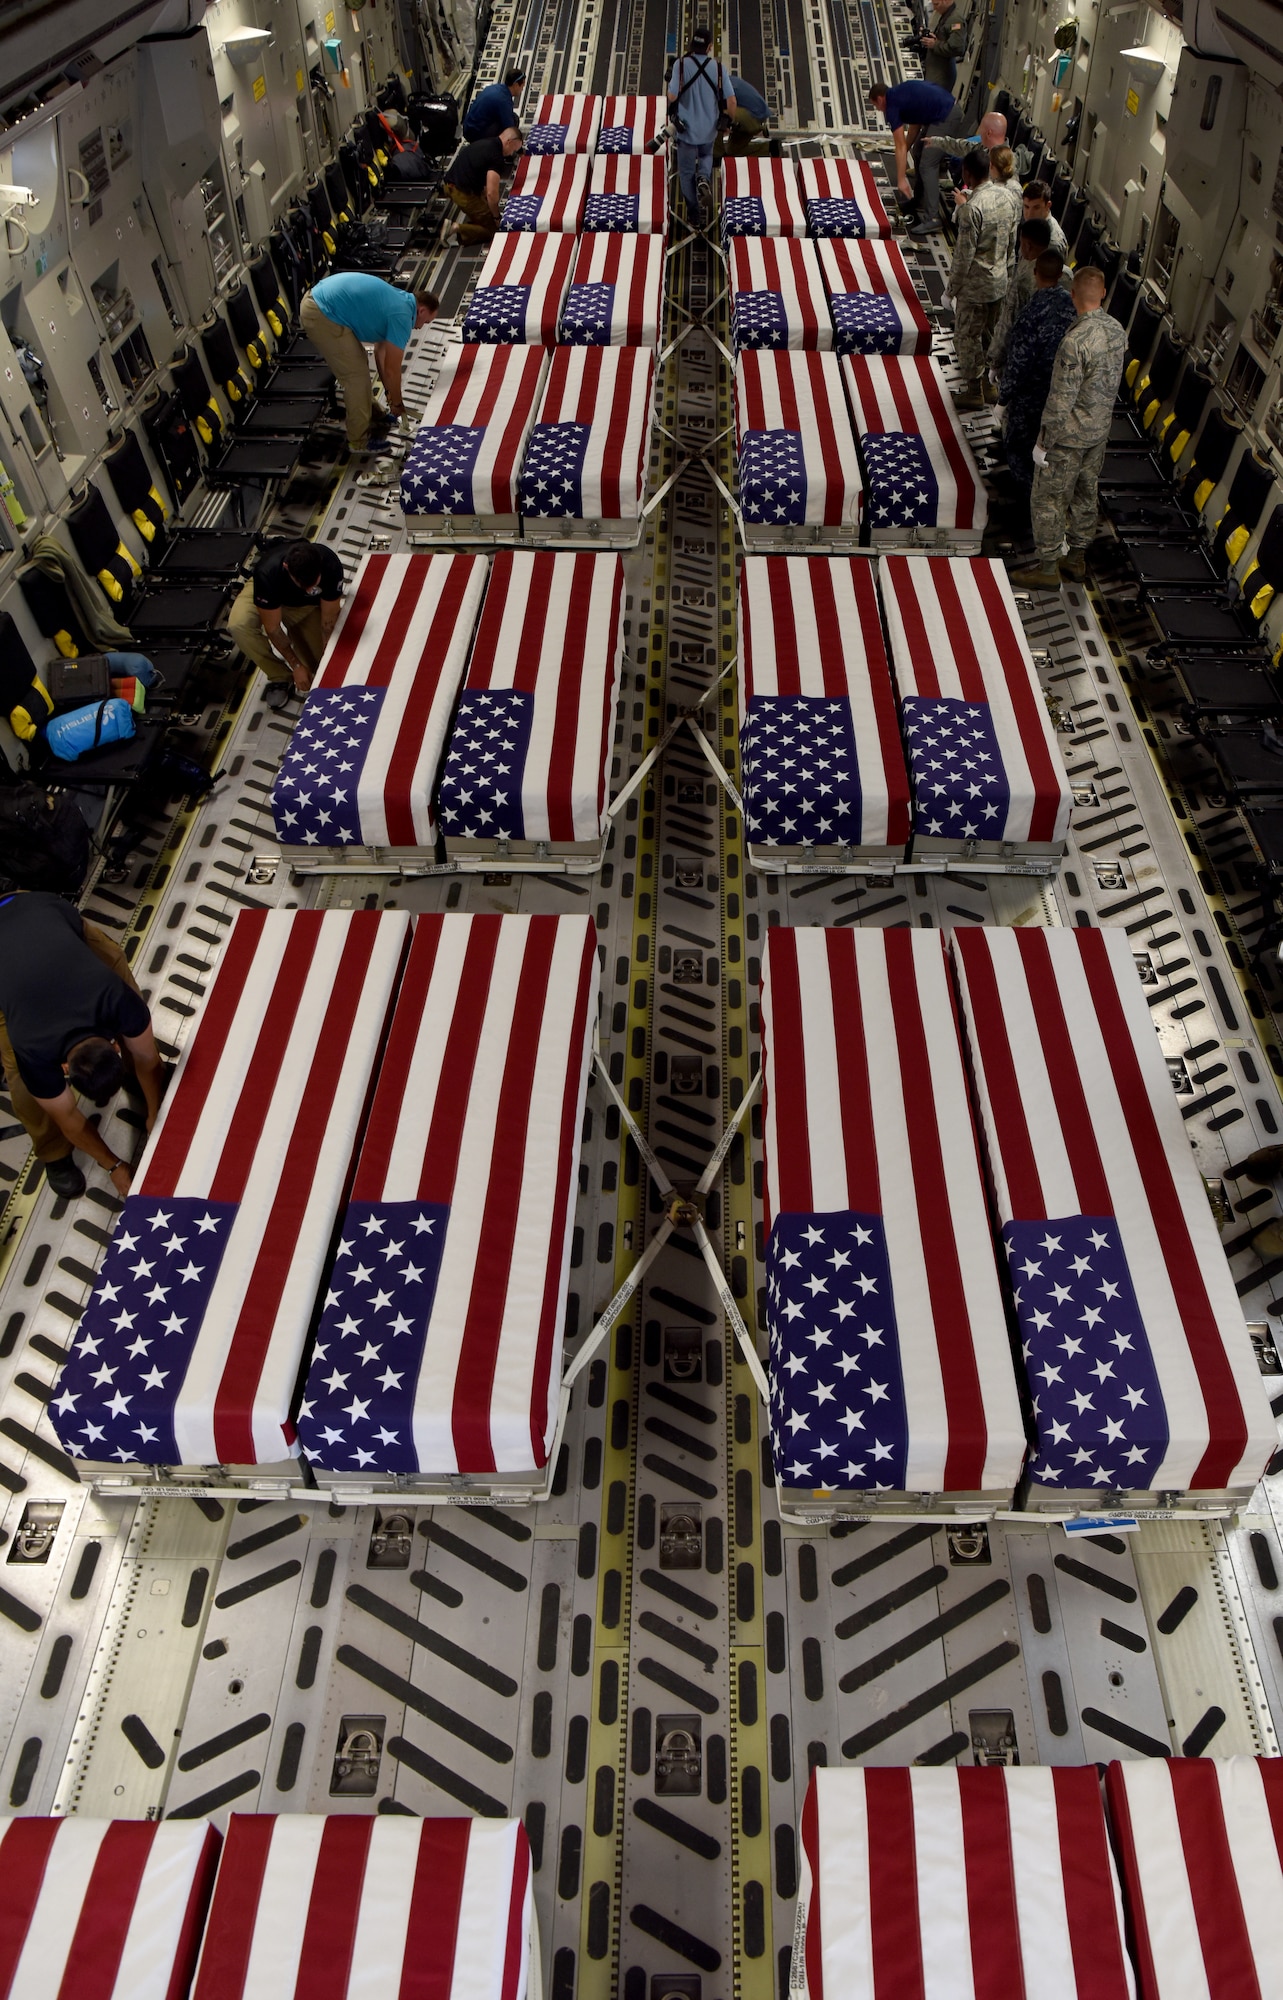 Transfer cases of 26 WWII human remains sit in a C-17 Globemaster III Sept. 14, 2018, at Offutt Air Force Base, Nebraska. Aircrew from Joint Base Charleston, S.C. was tasked to deliver the remains due to its rapid mobility capabilities.